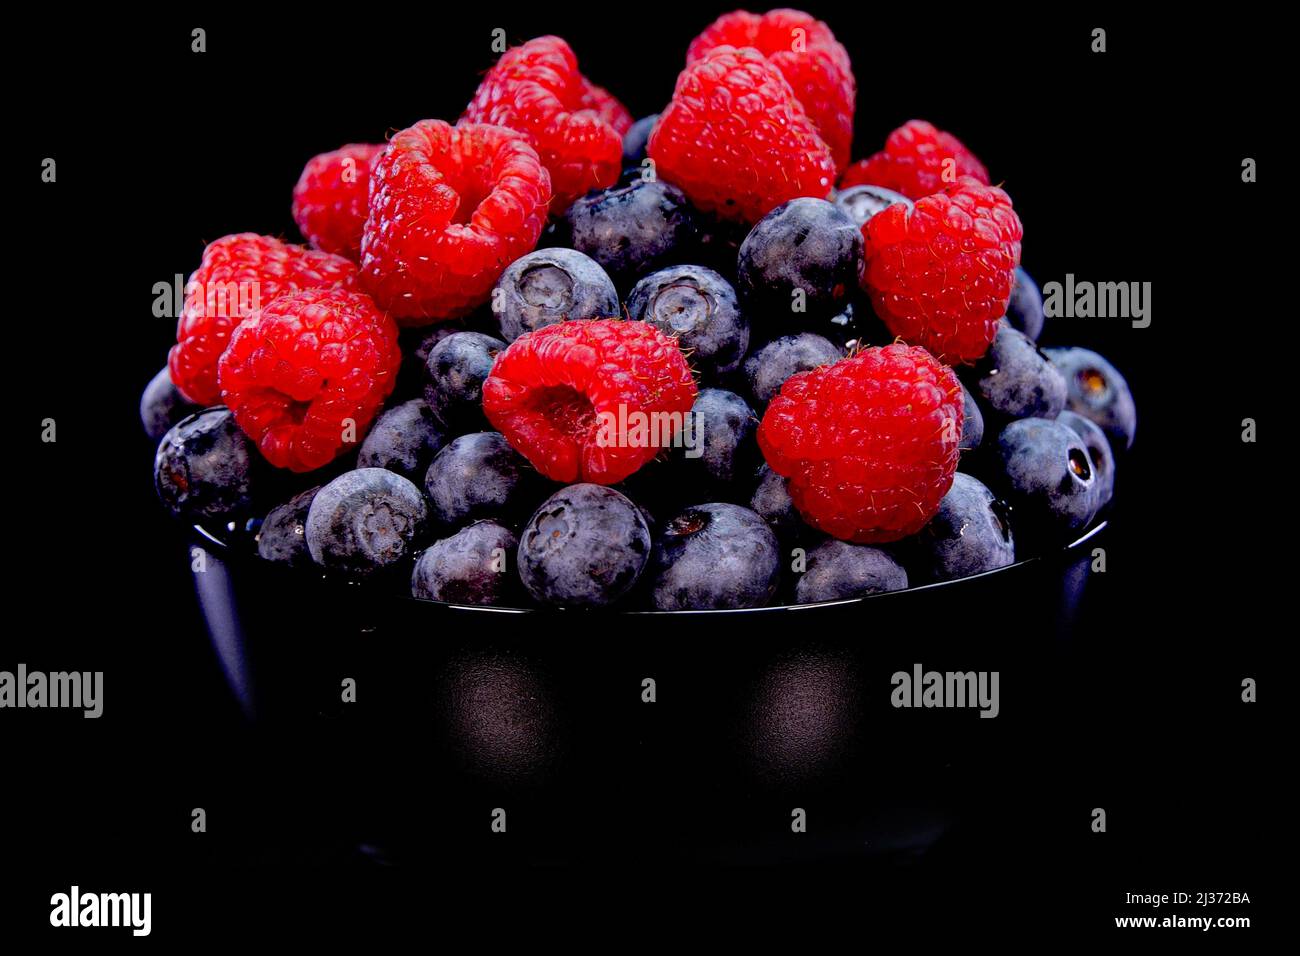 Raspberries and blueberries in a black bowl, on a black background. Fresh, firm and tasty berries. Raw vegan summer snacks, forest berries. Stock Photo